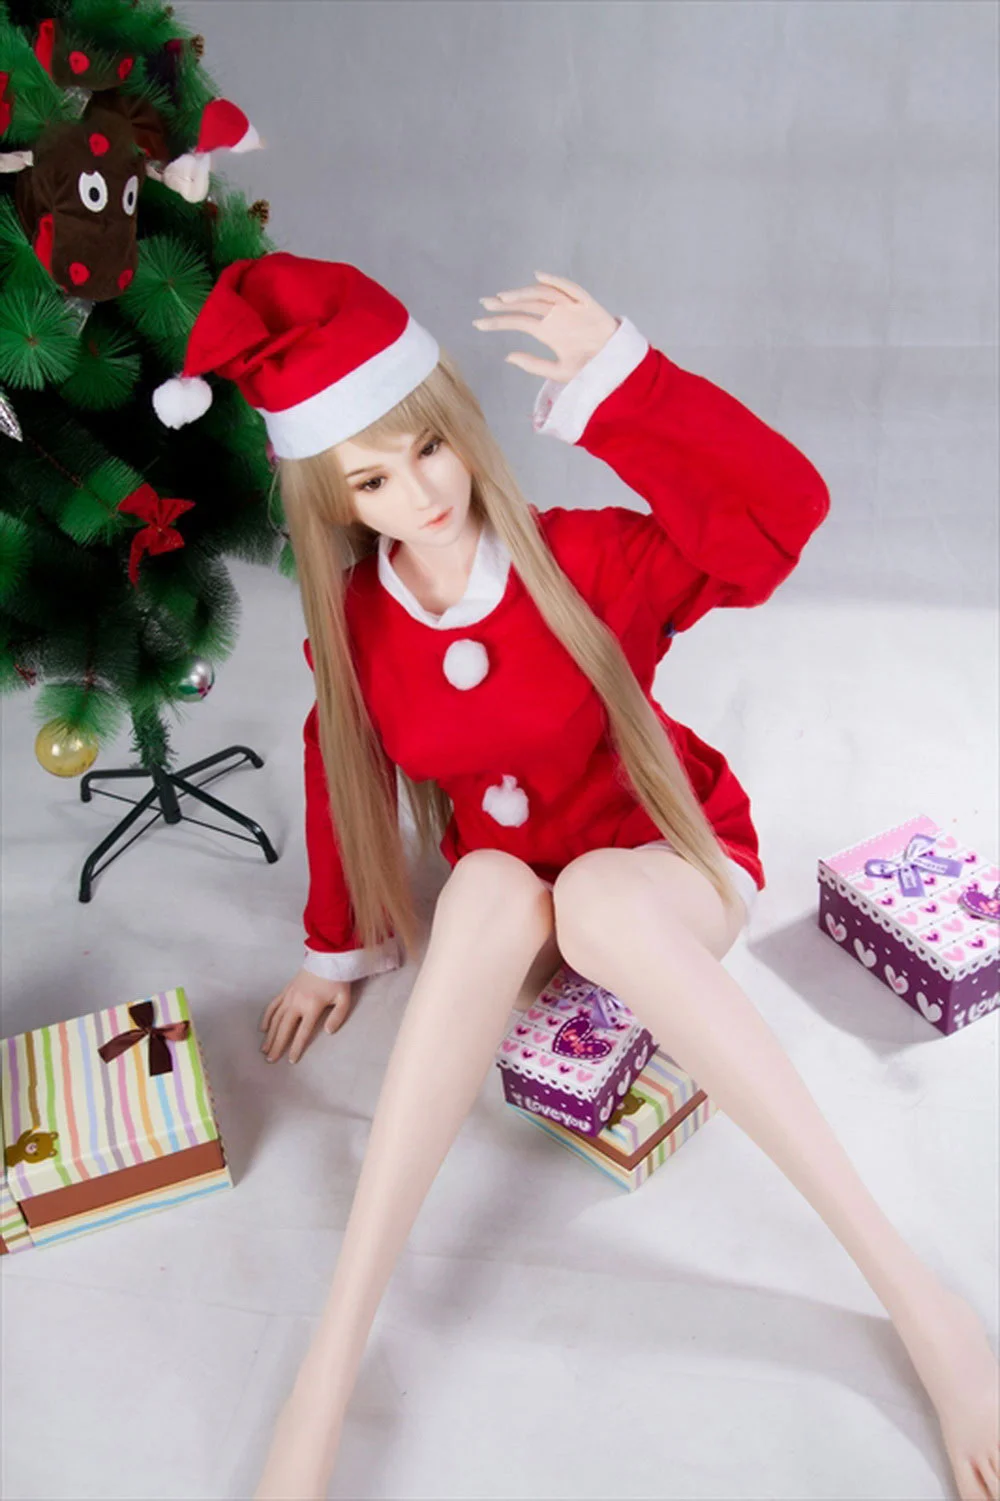 Anime sex doll wearing Christmas hat